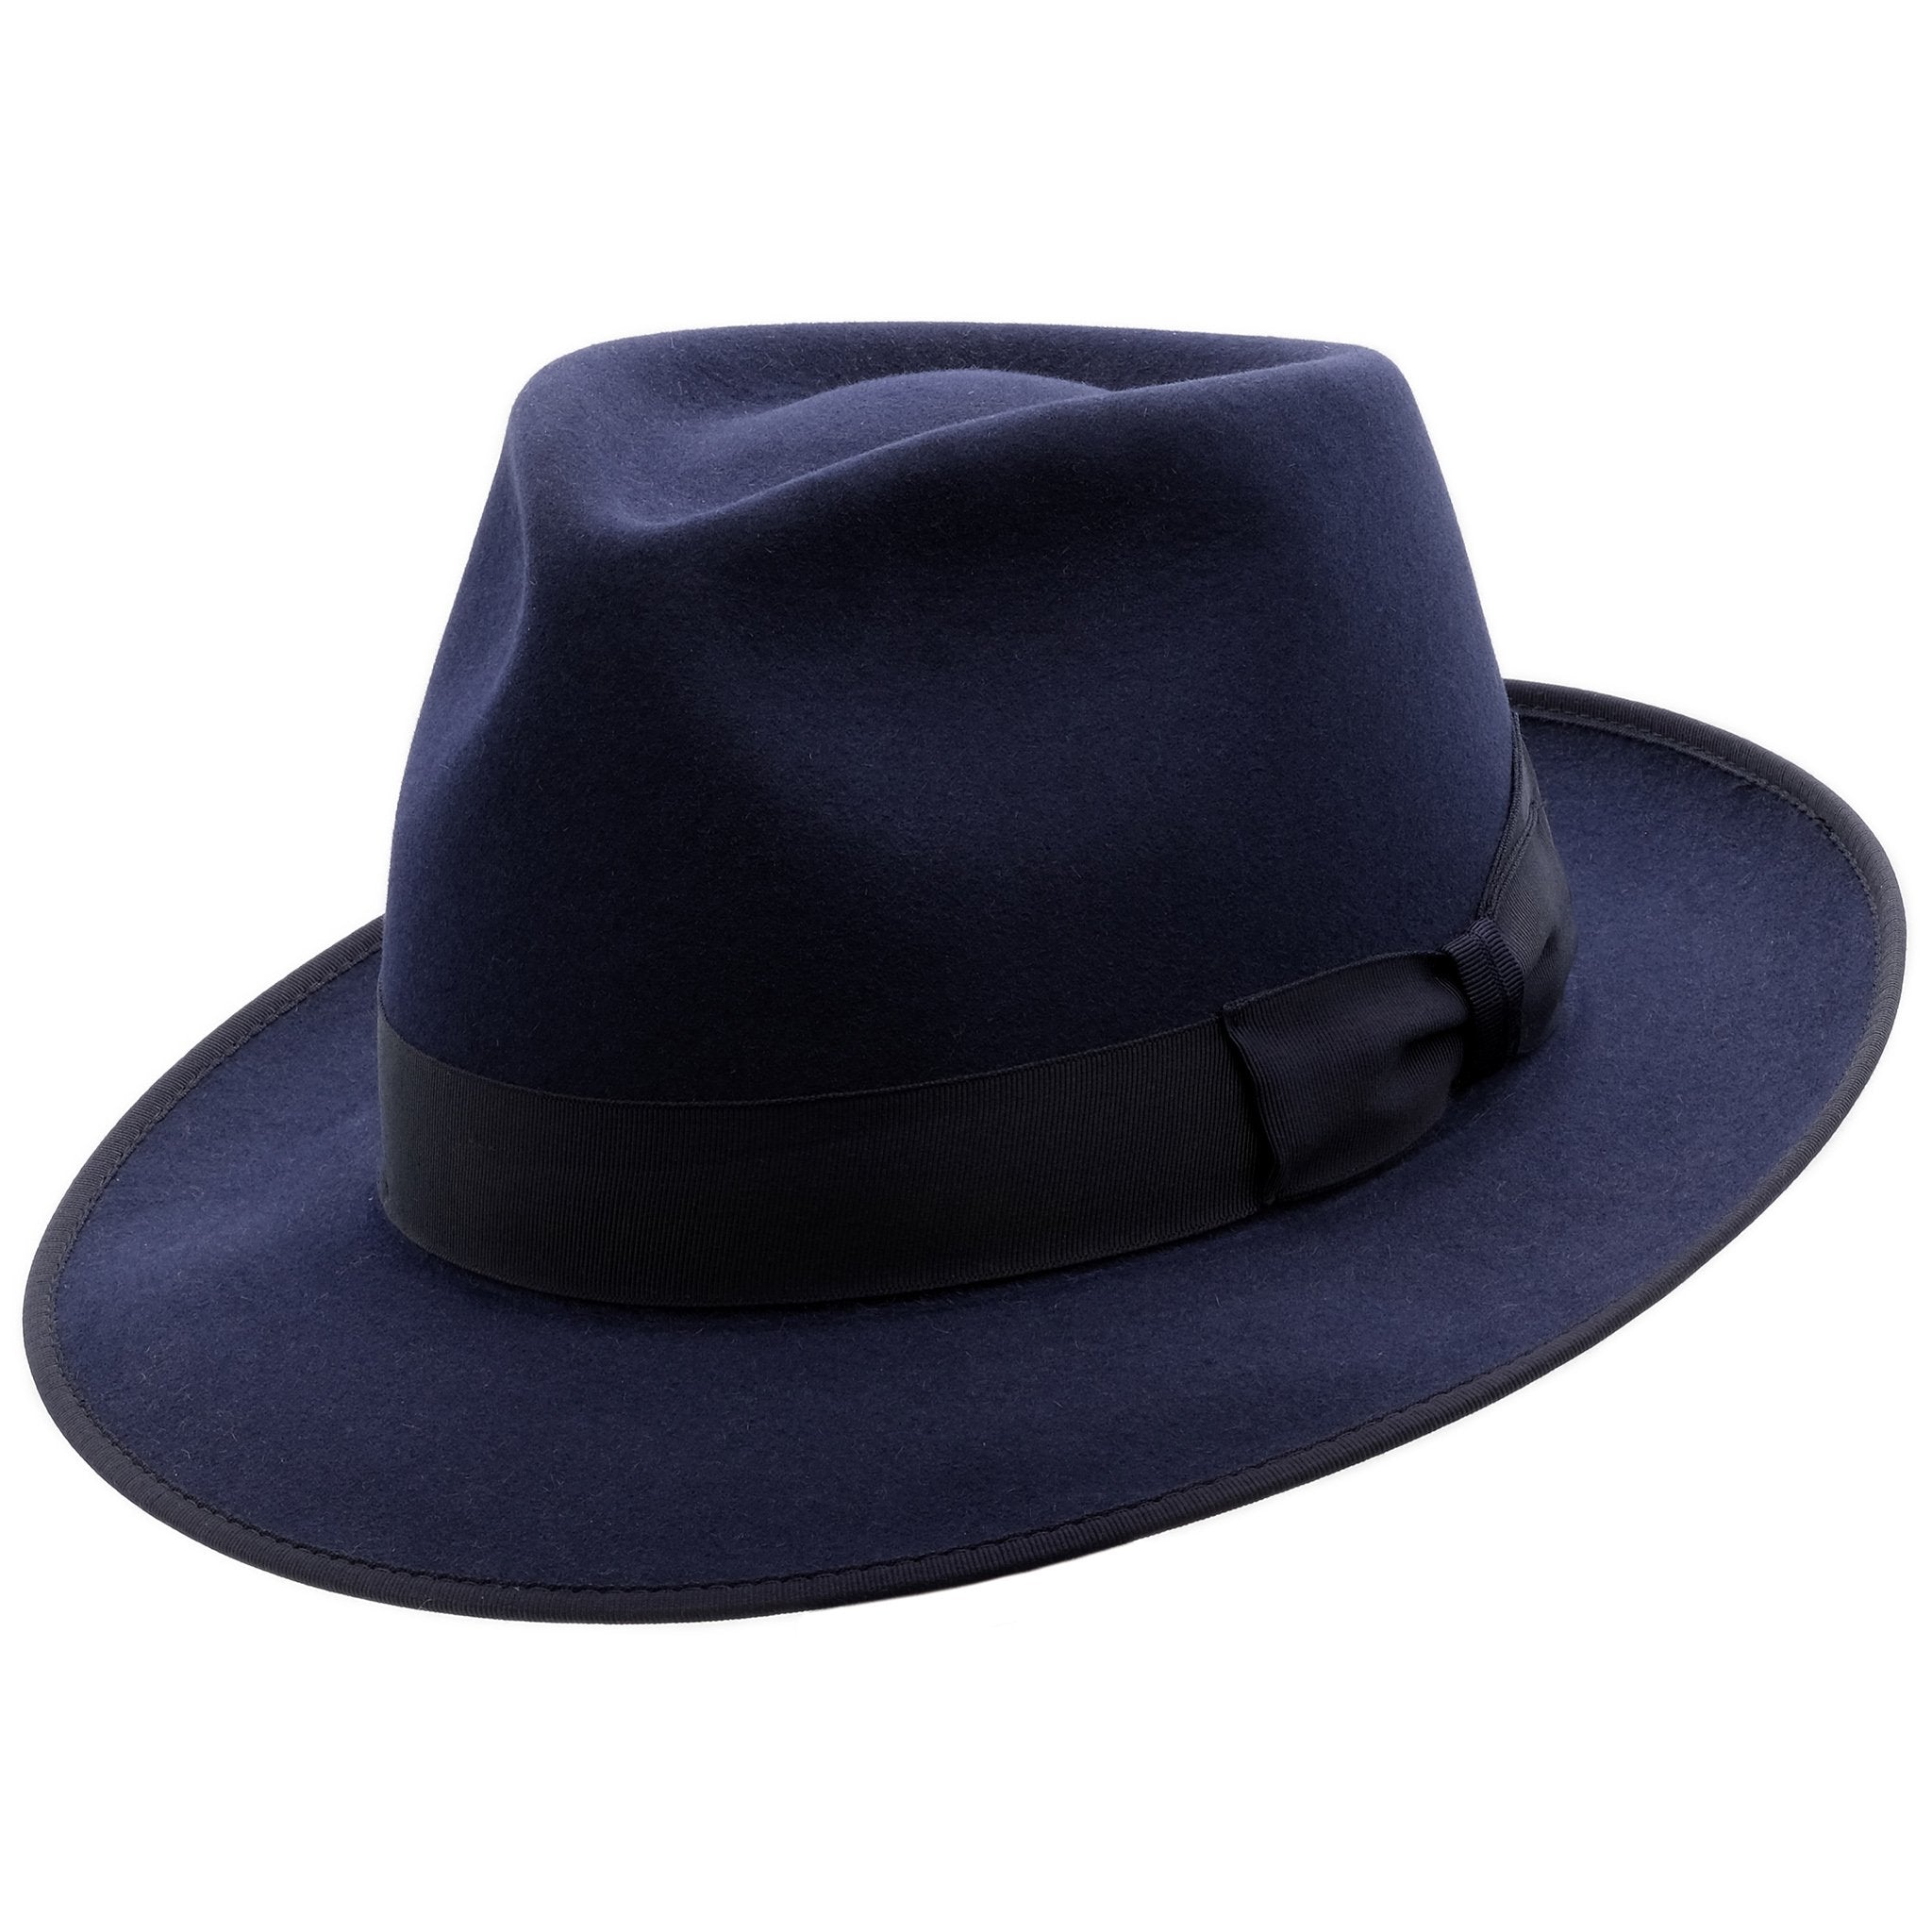 angle view of akubra Stylemaster hat in Federation Navy colour